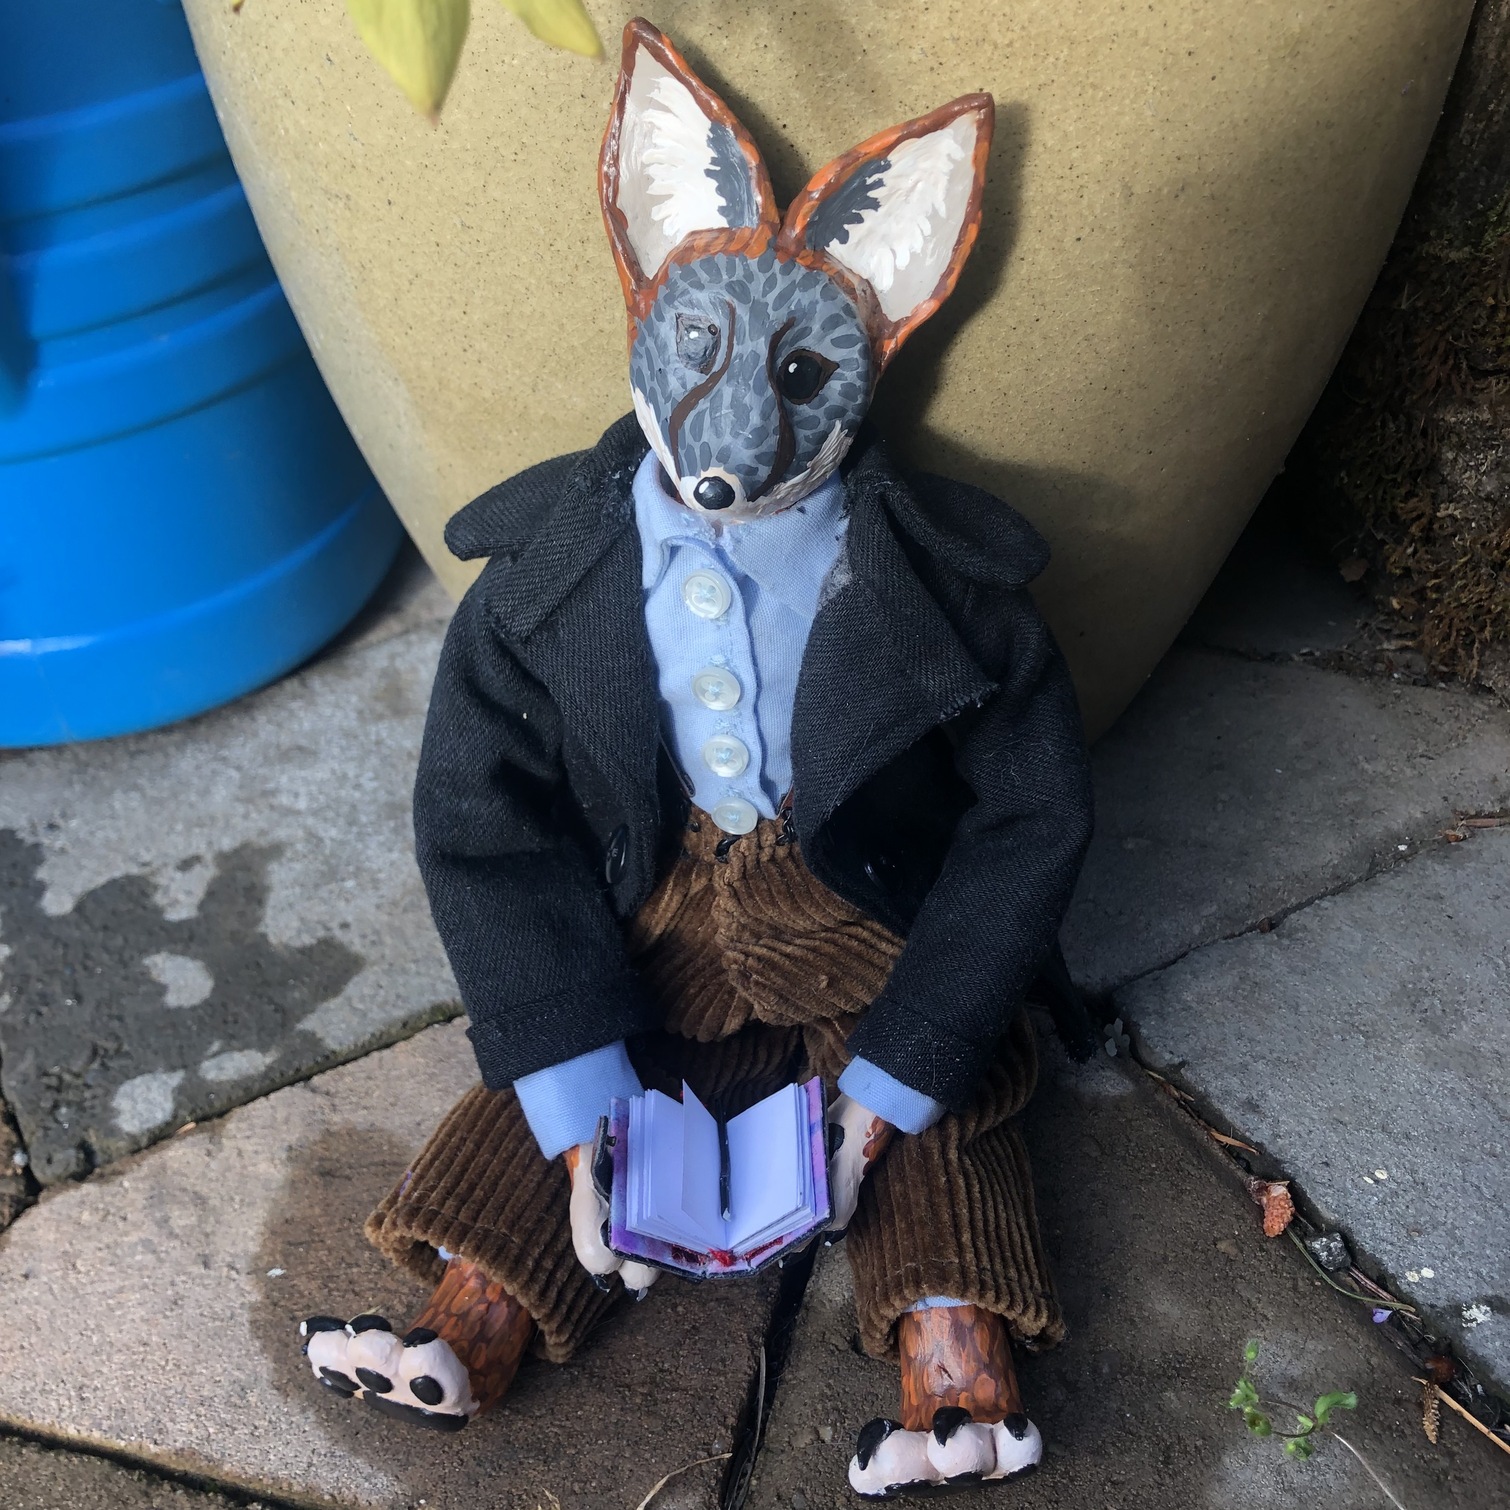 A small humanoid fox doll with clay face and paws, dressed in a wool coat, sits in a garden with a book. Link takes you to project page.